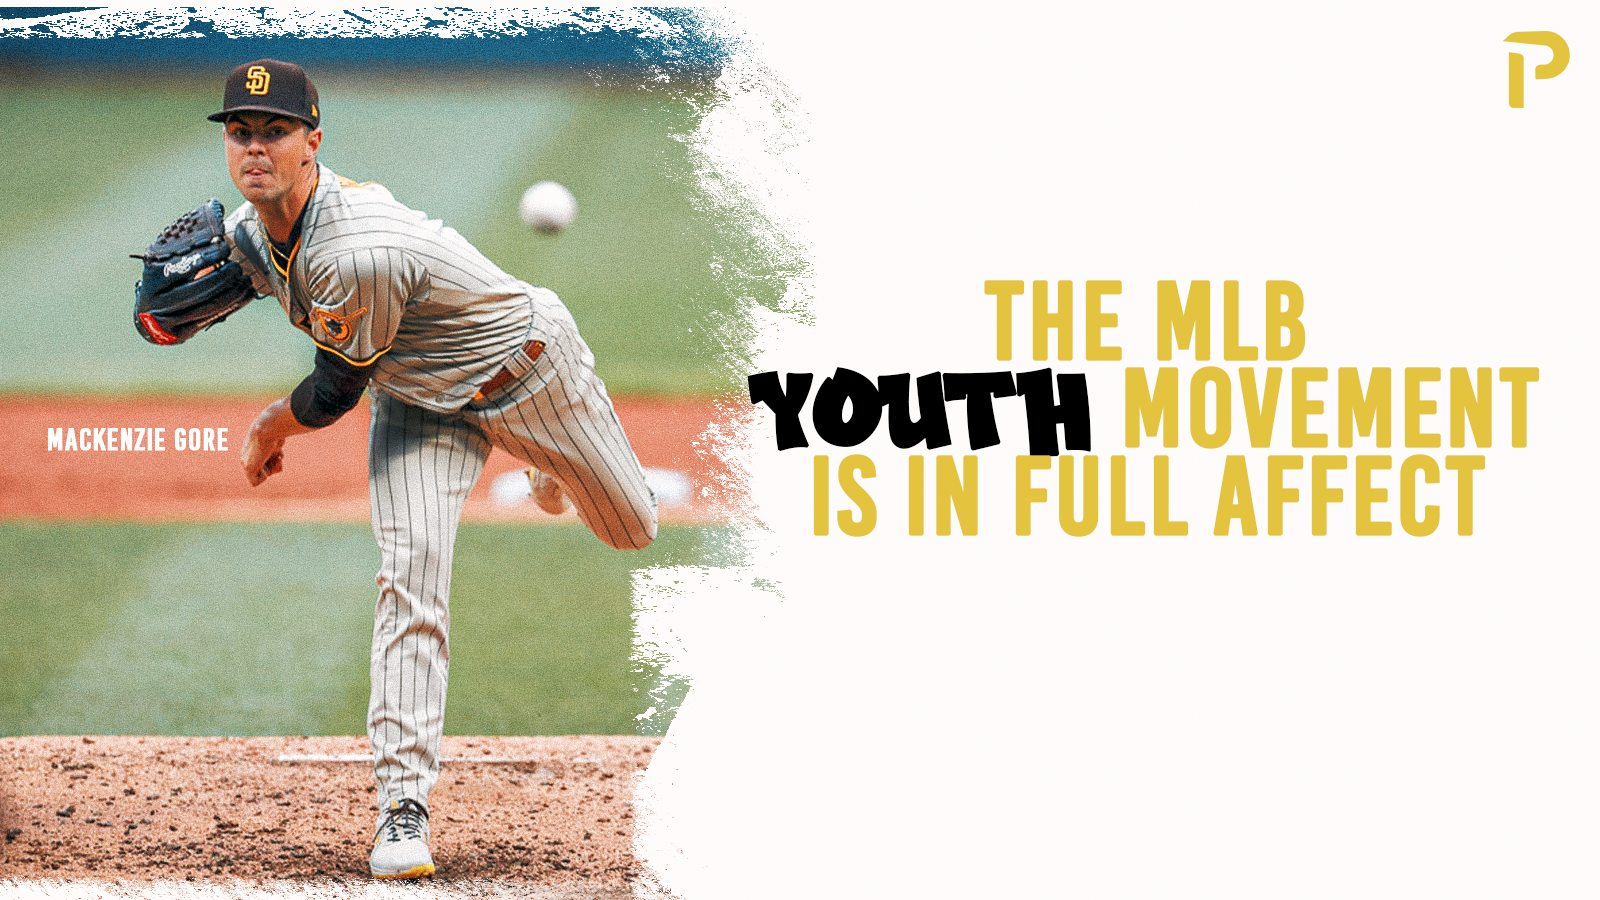 The MLB Youth Movement is in Full Affect